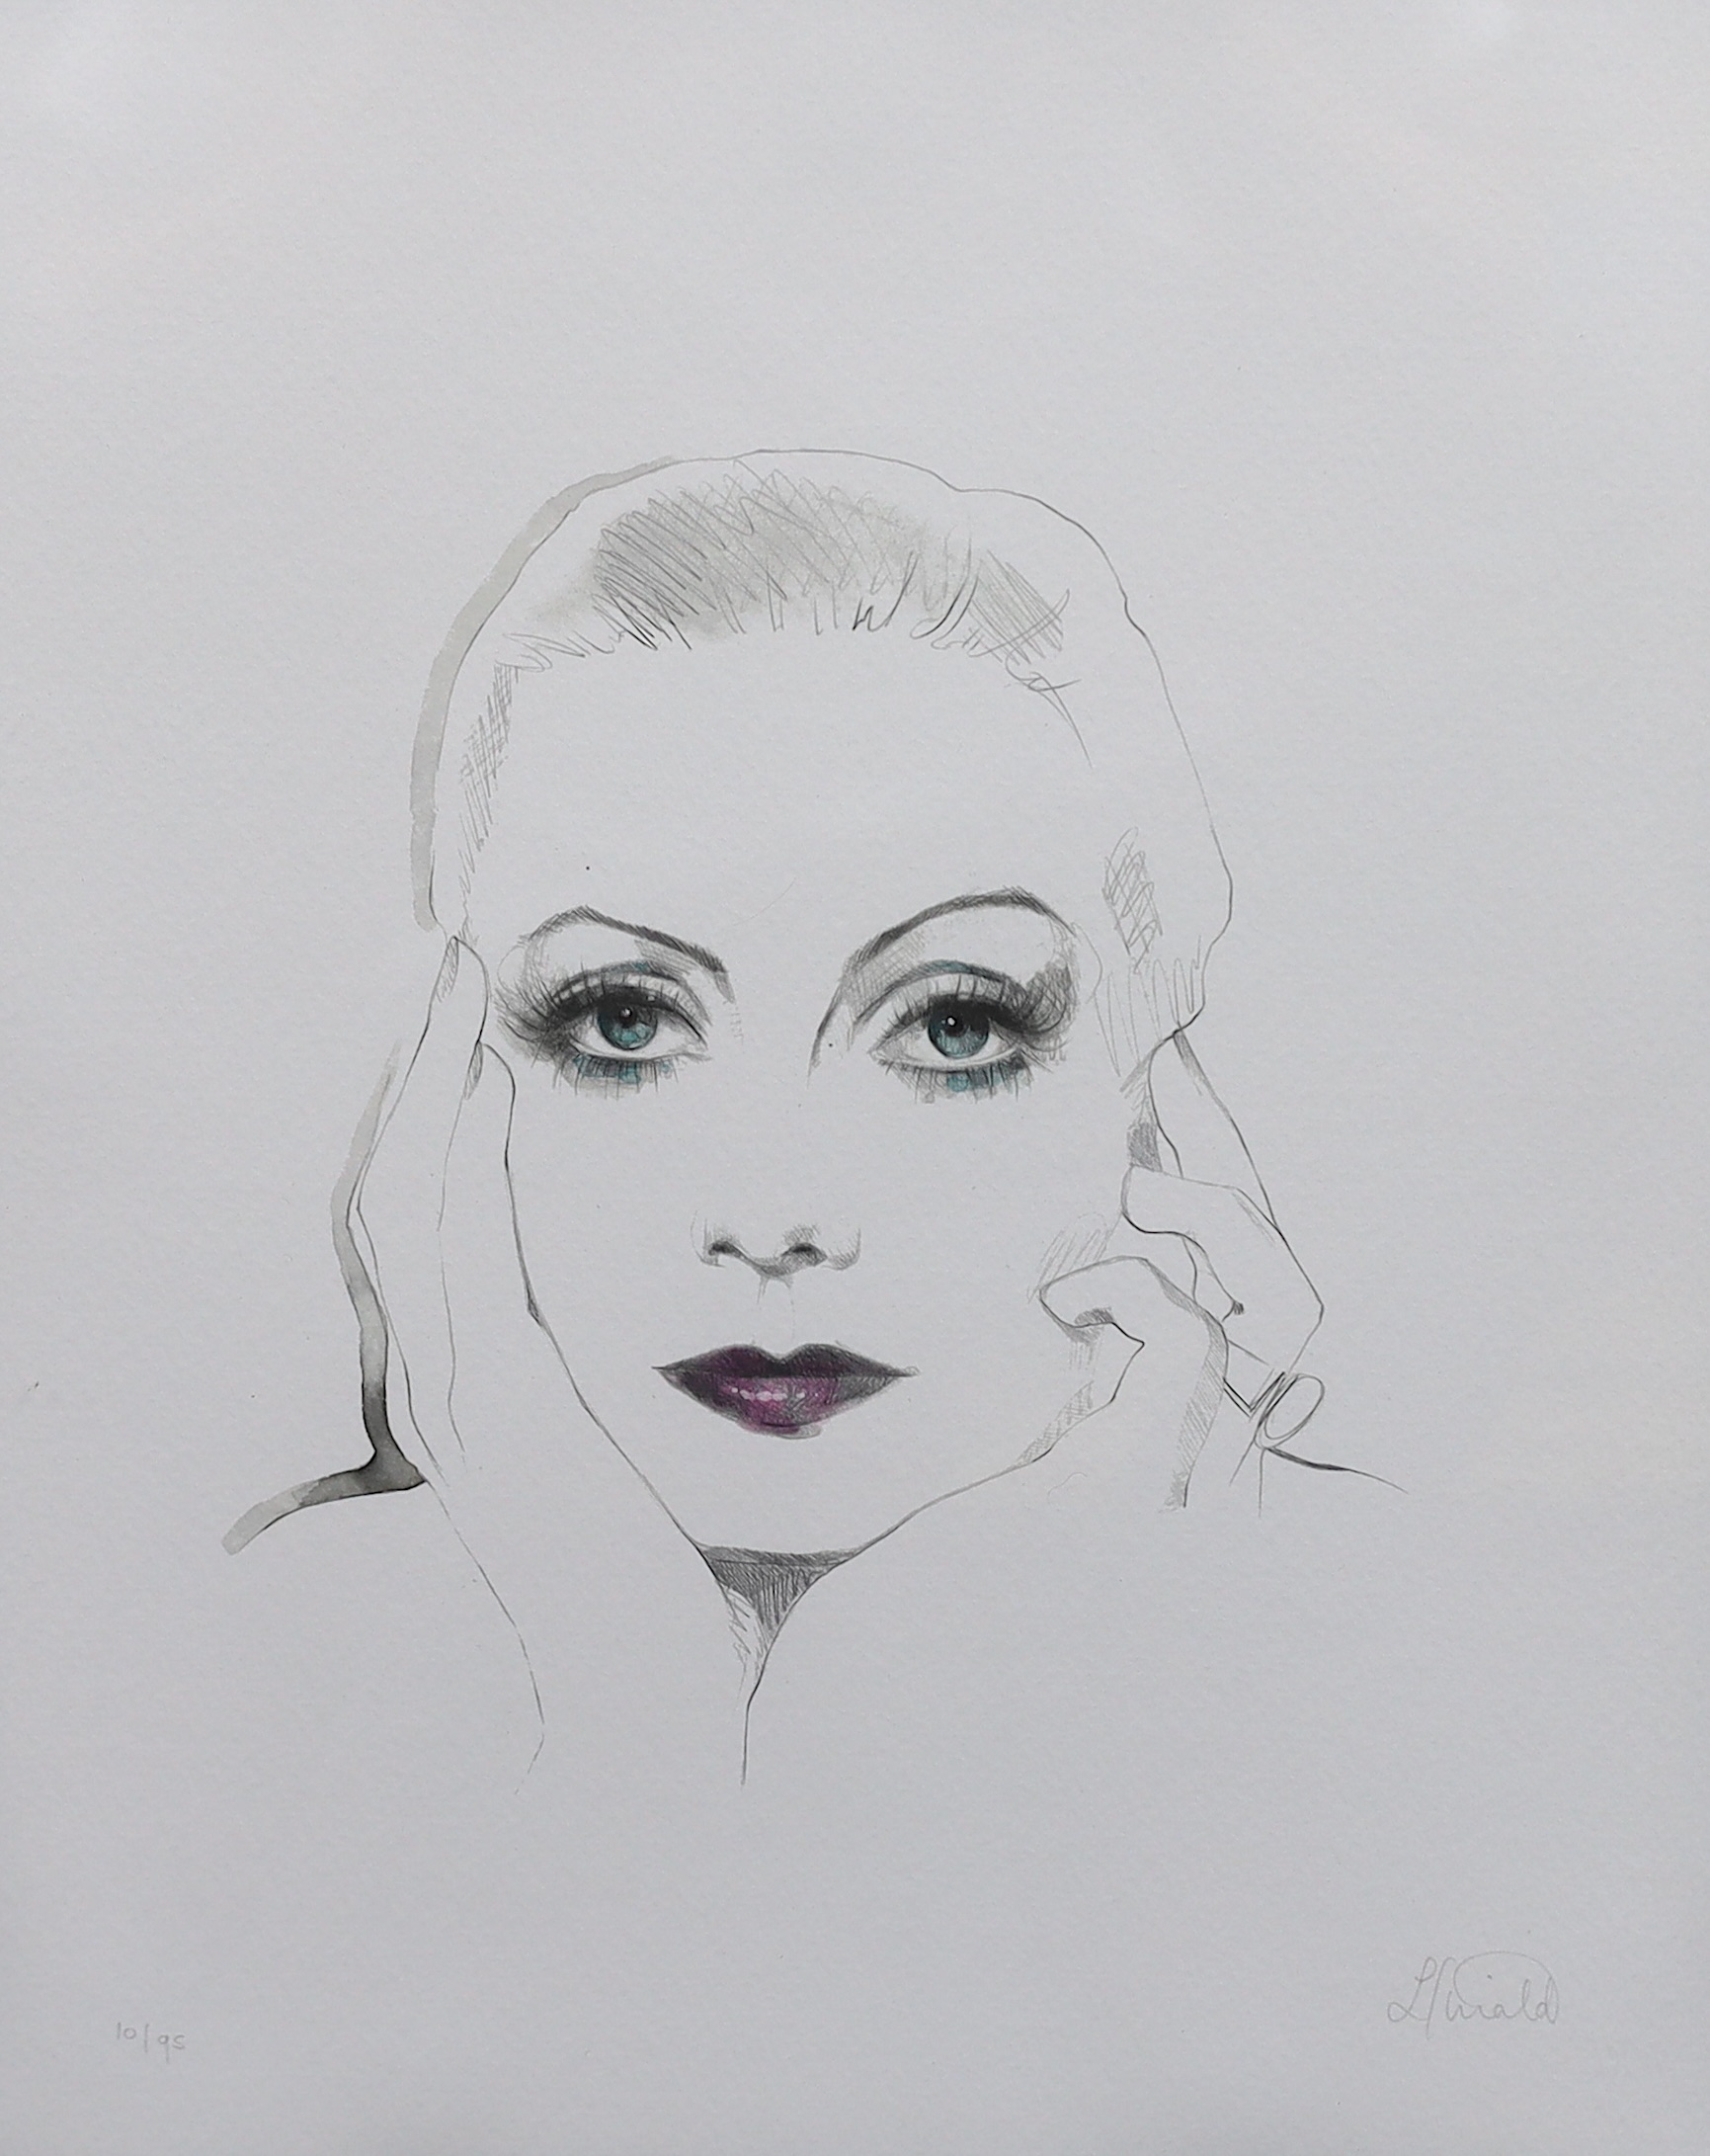 Laura Tinald (Contemporary), giclée print on premium deckled edge paper, 'Greta', signed in pencil, numbered 10/75, 38 x 30cm